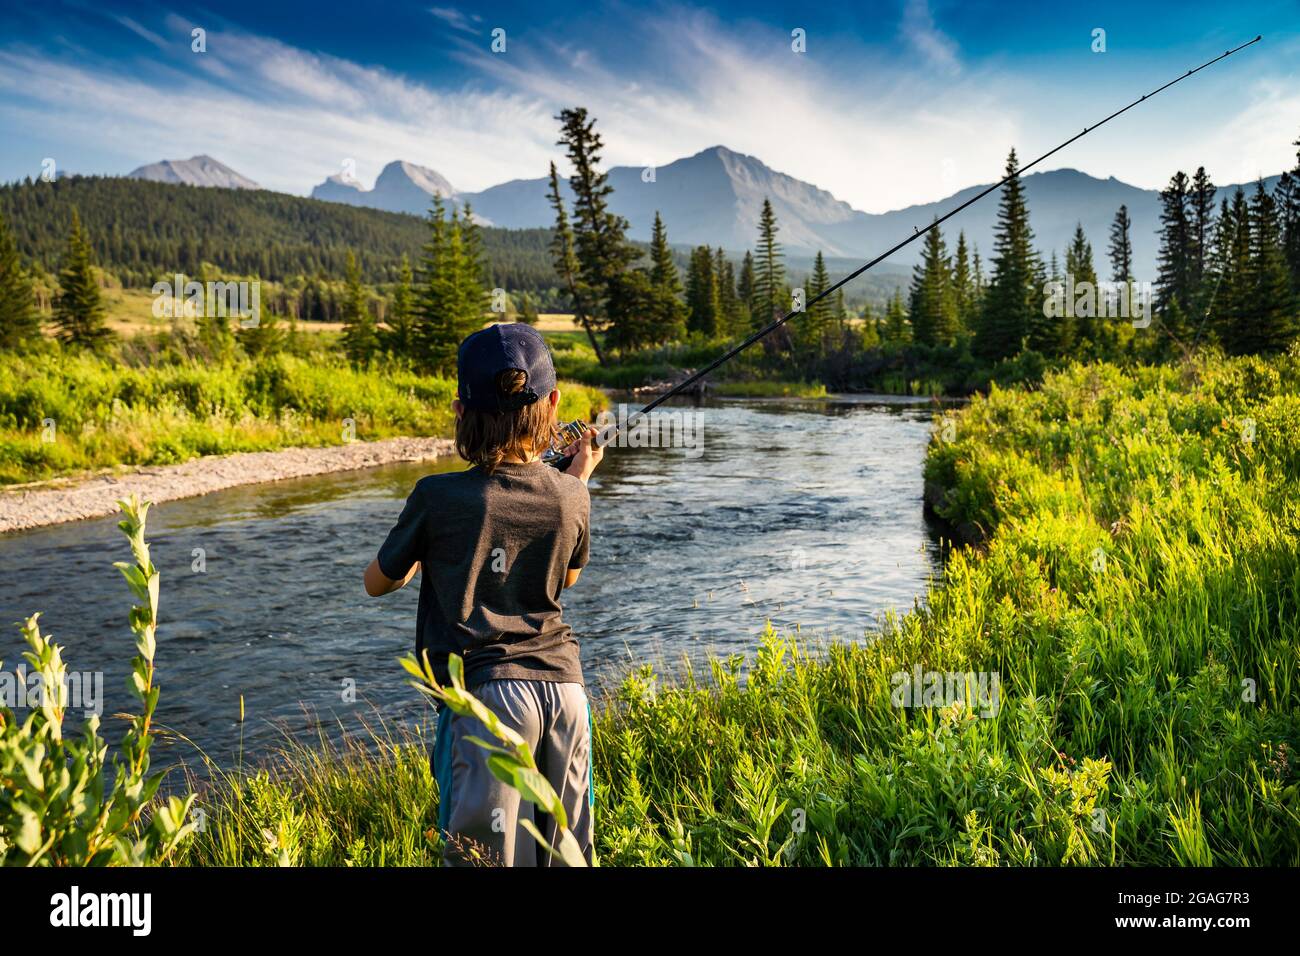 A young child casting his fishing rod into the Crossest River with a Rocky mountain backdrop in Southern Alberta Canada. Stock Photo